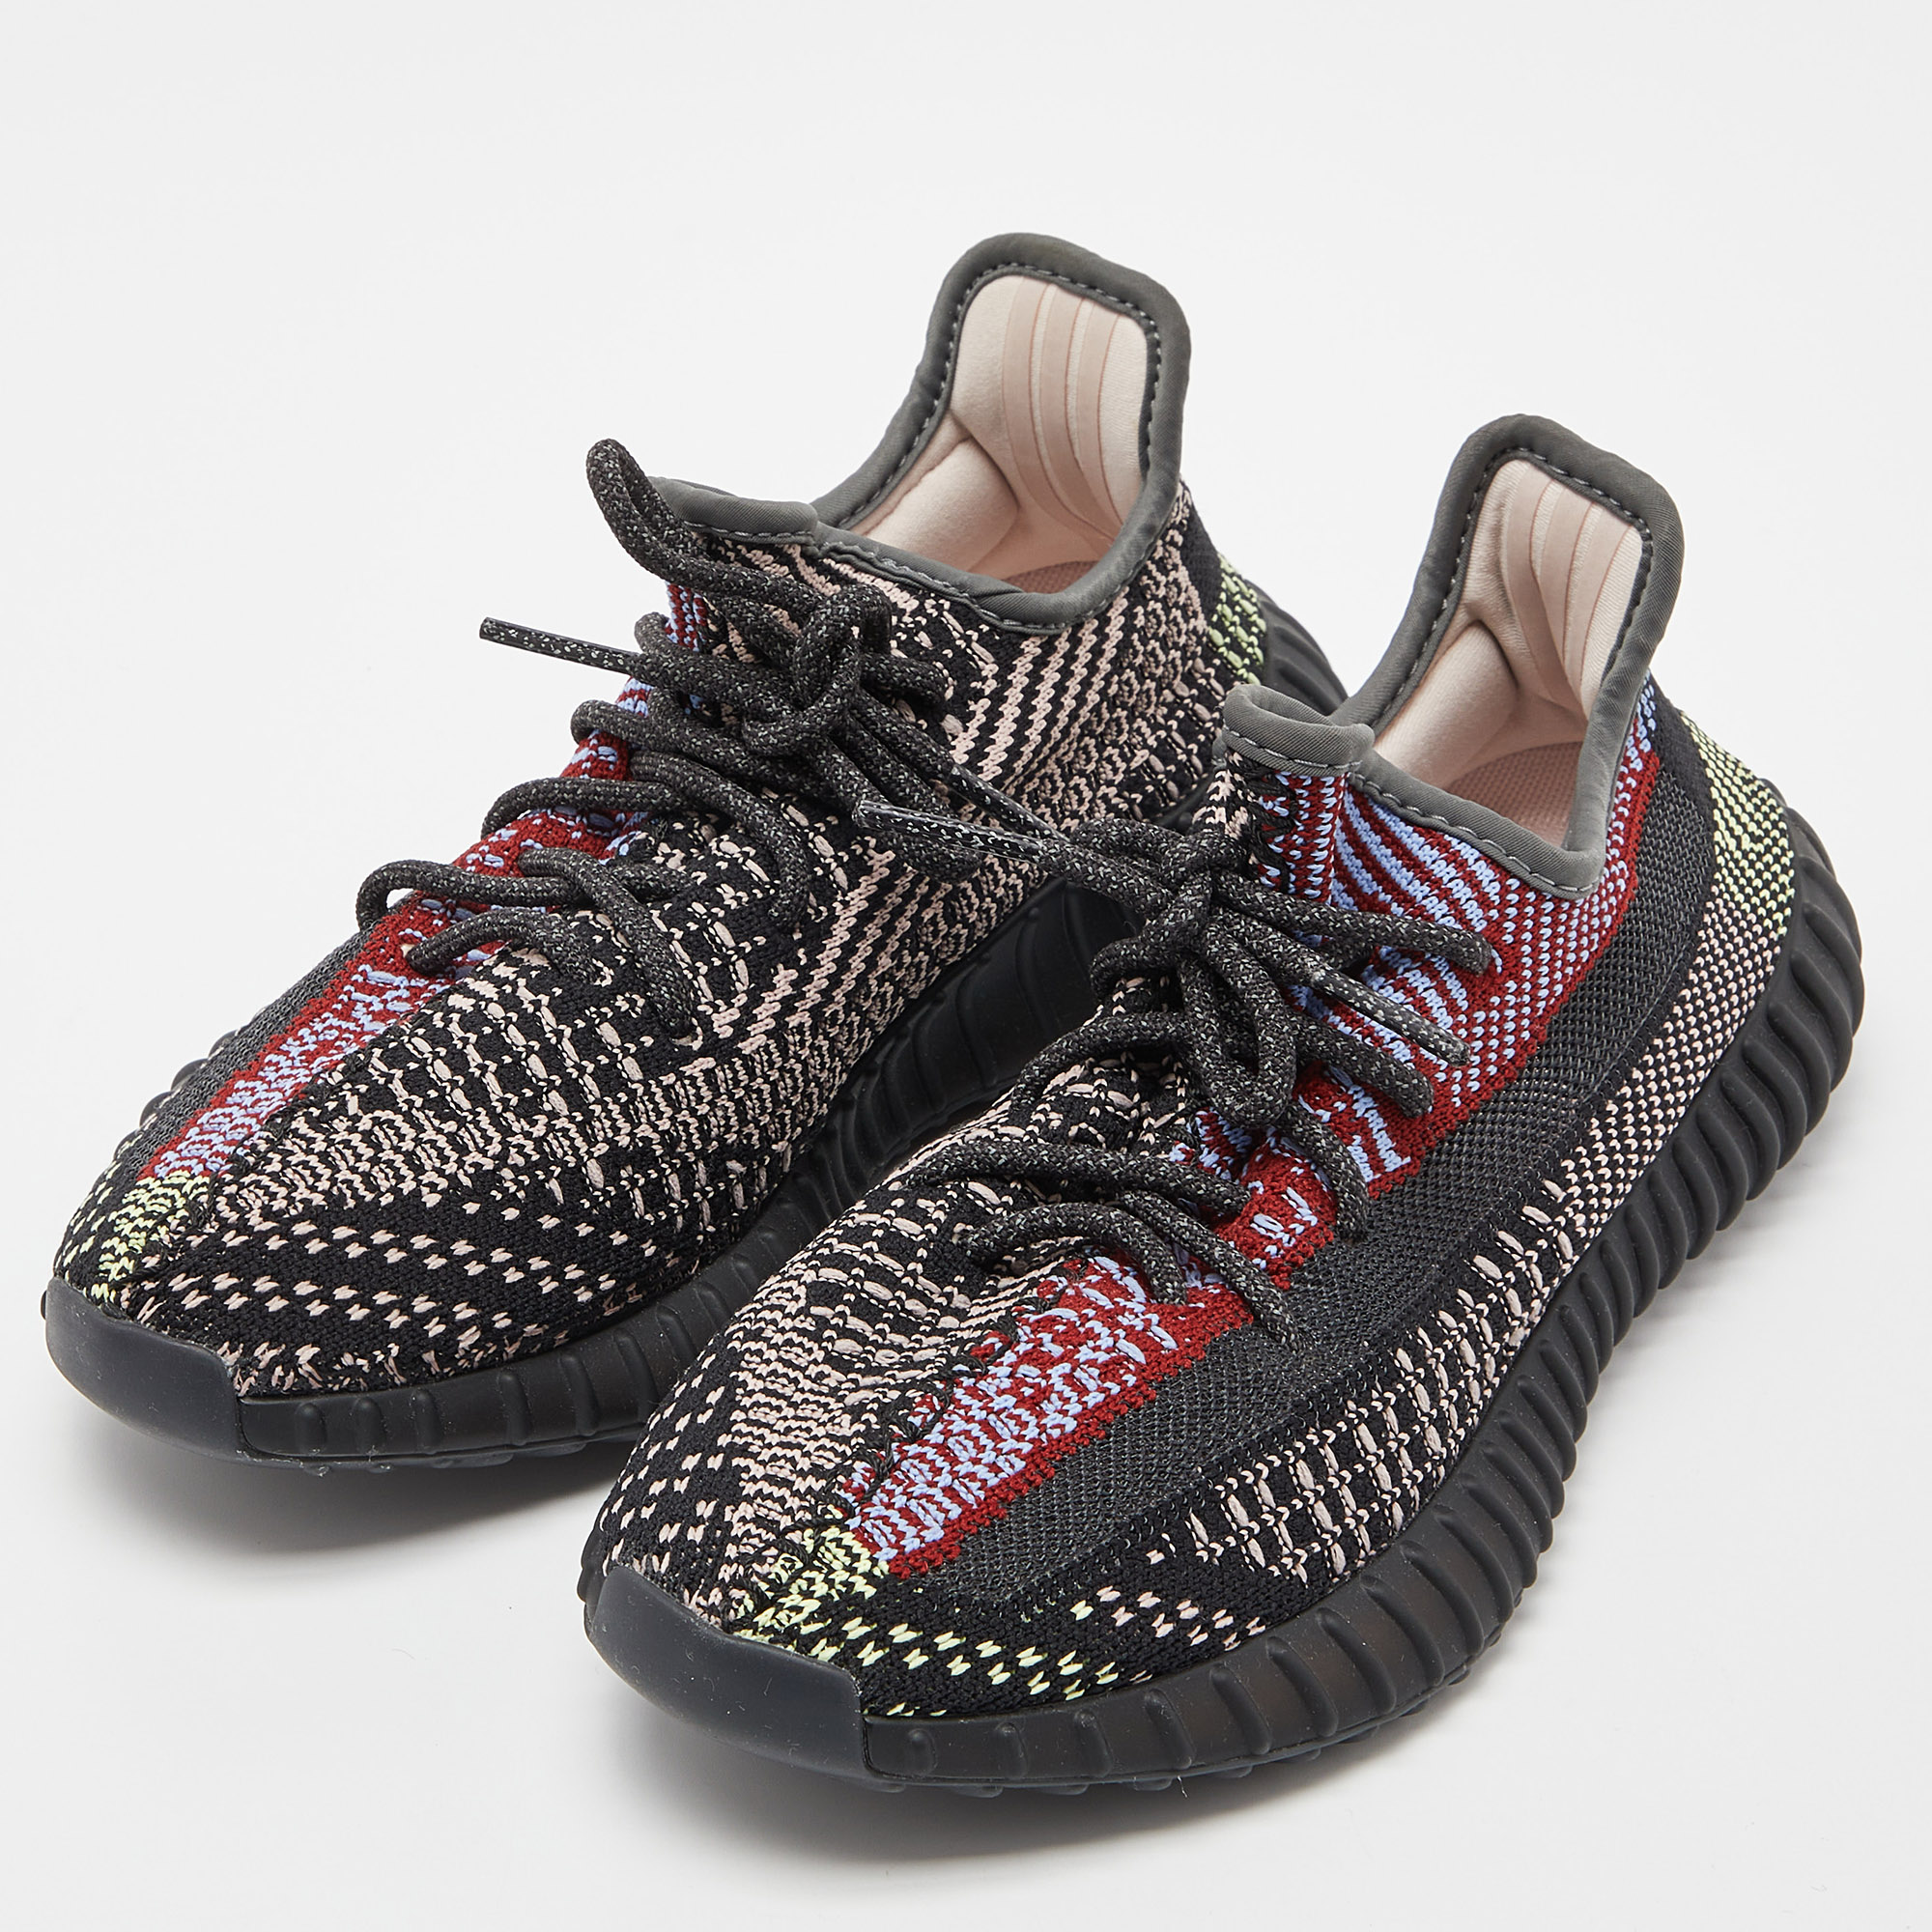 

Yeezy x Adidas Multicolor Knit Fabric Boost 350 V2 Yecheil (Non-Reflective) Sneakers Size, Black